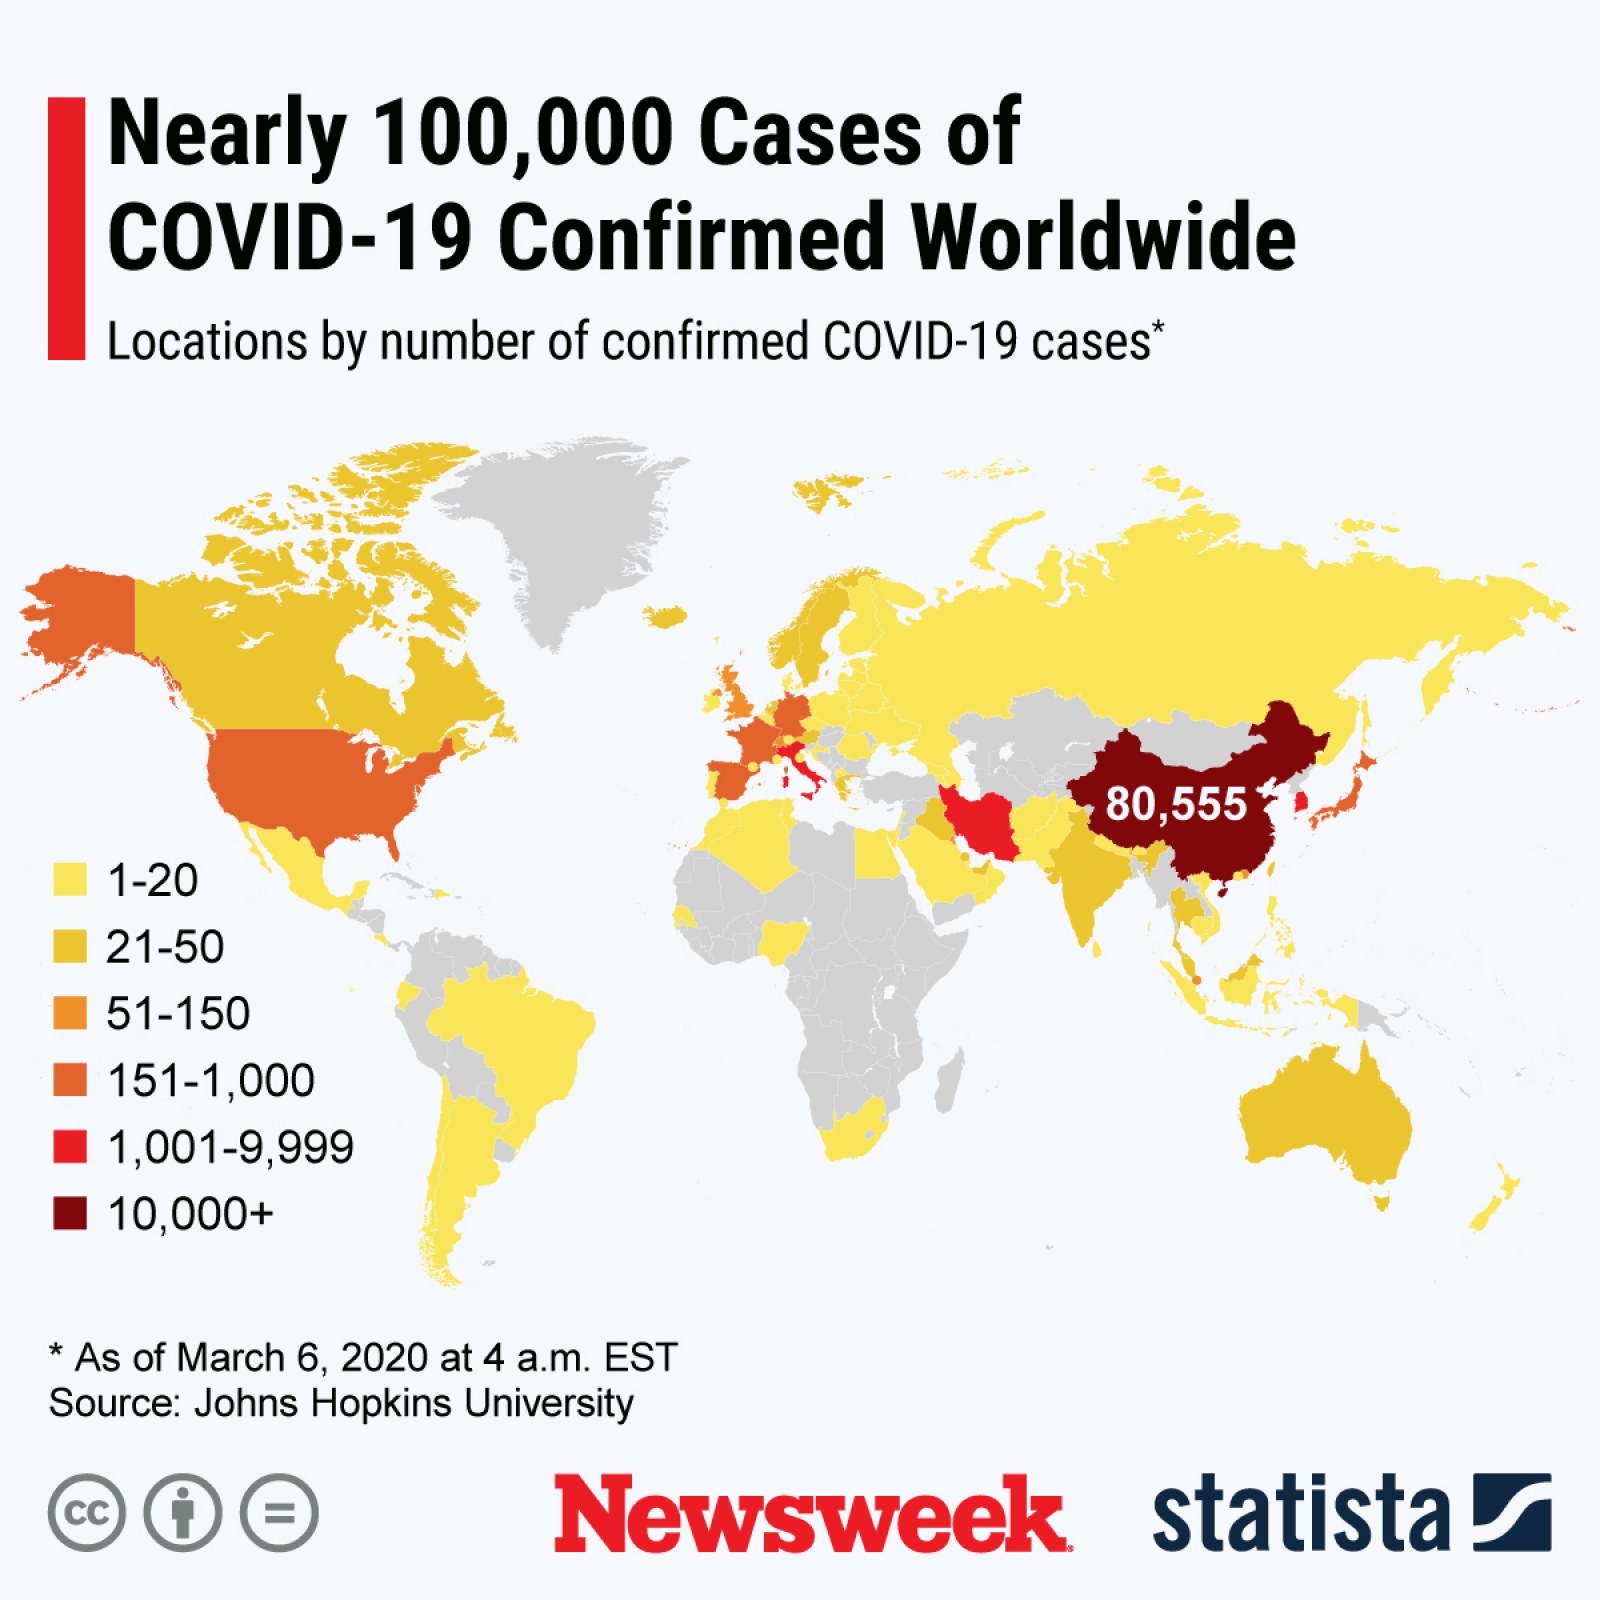 Covid 19 cases worldwide